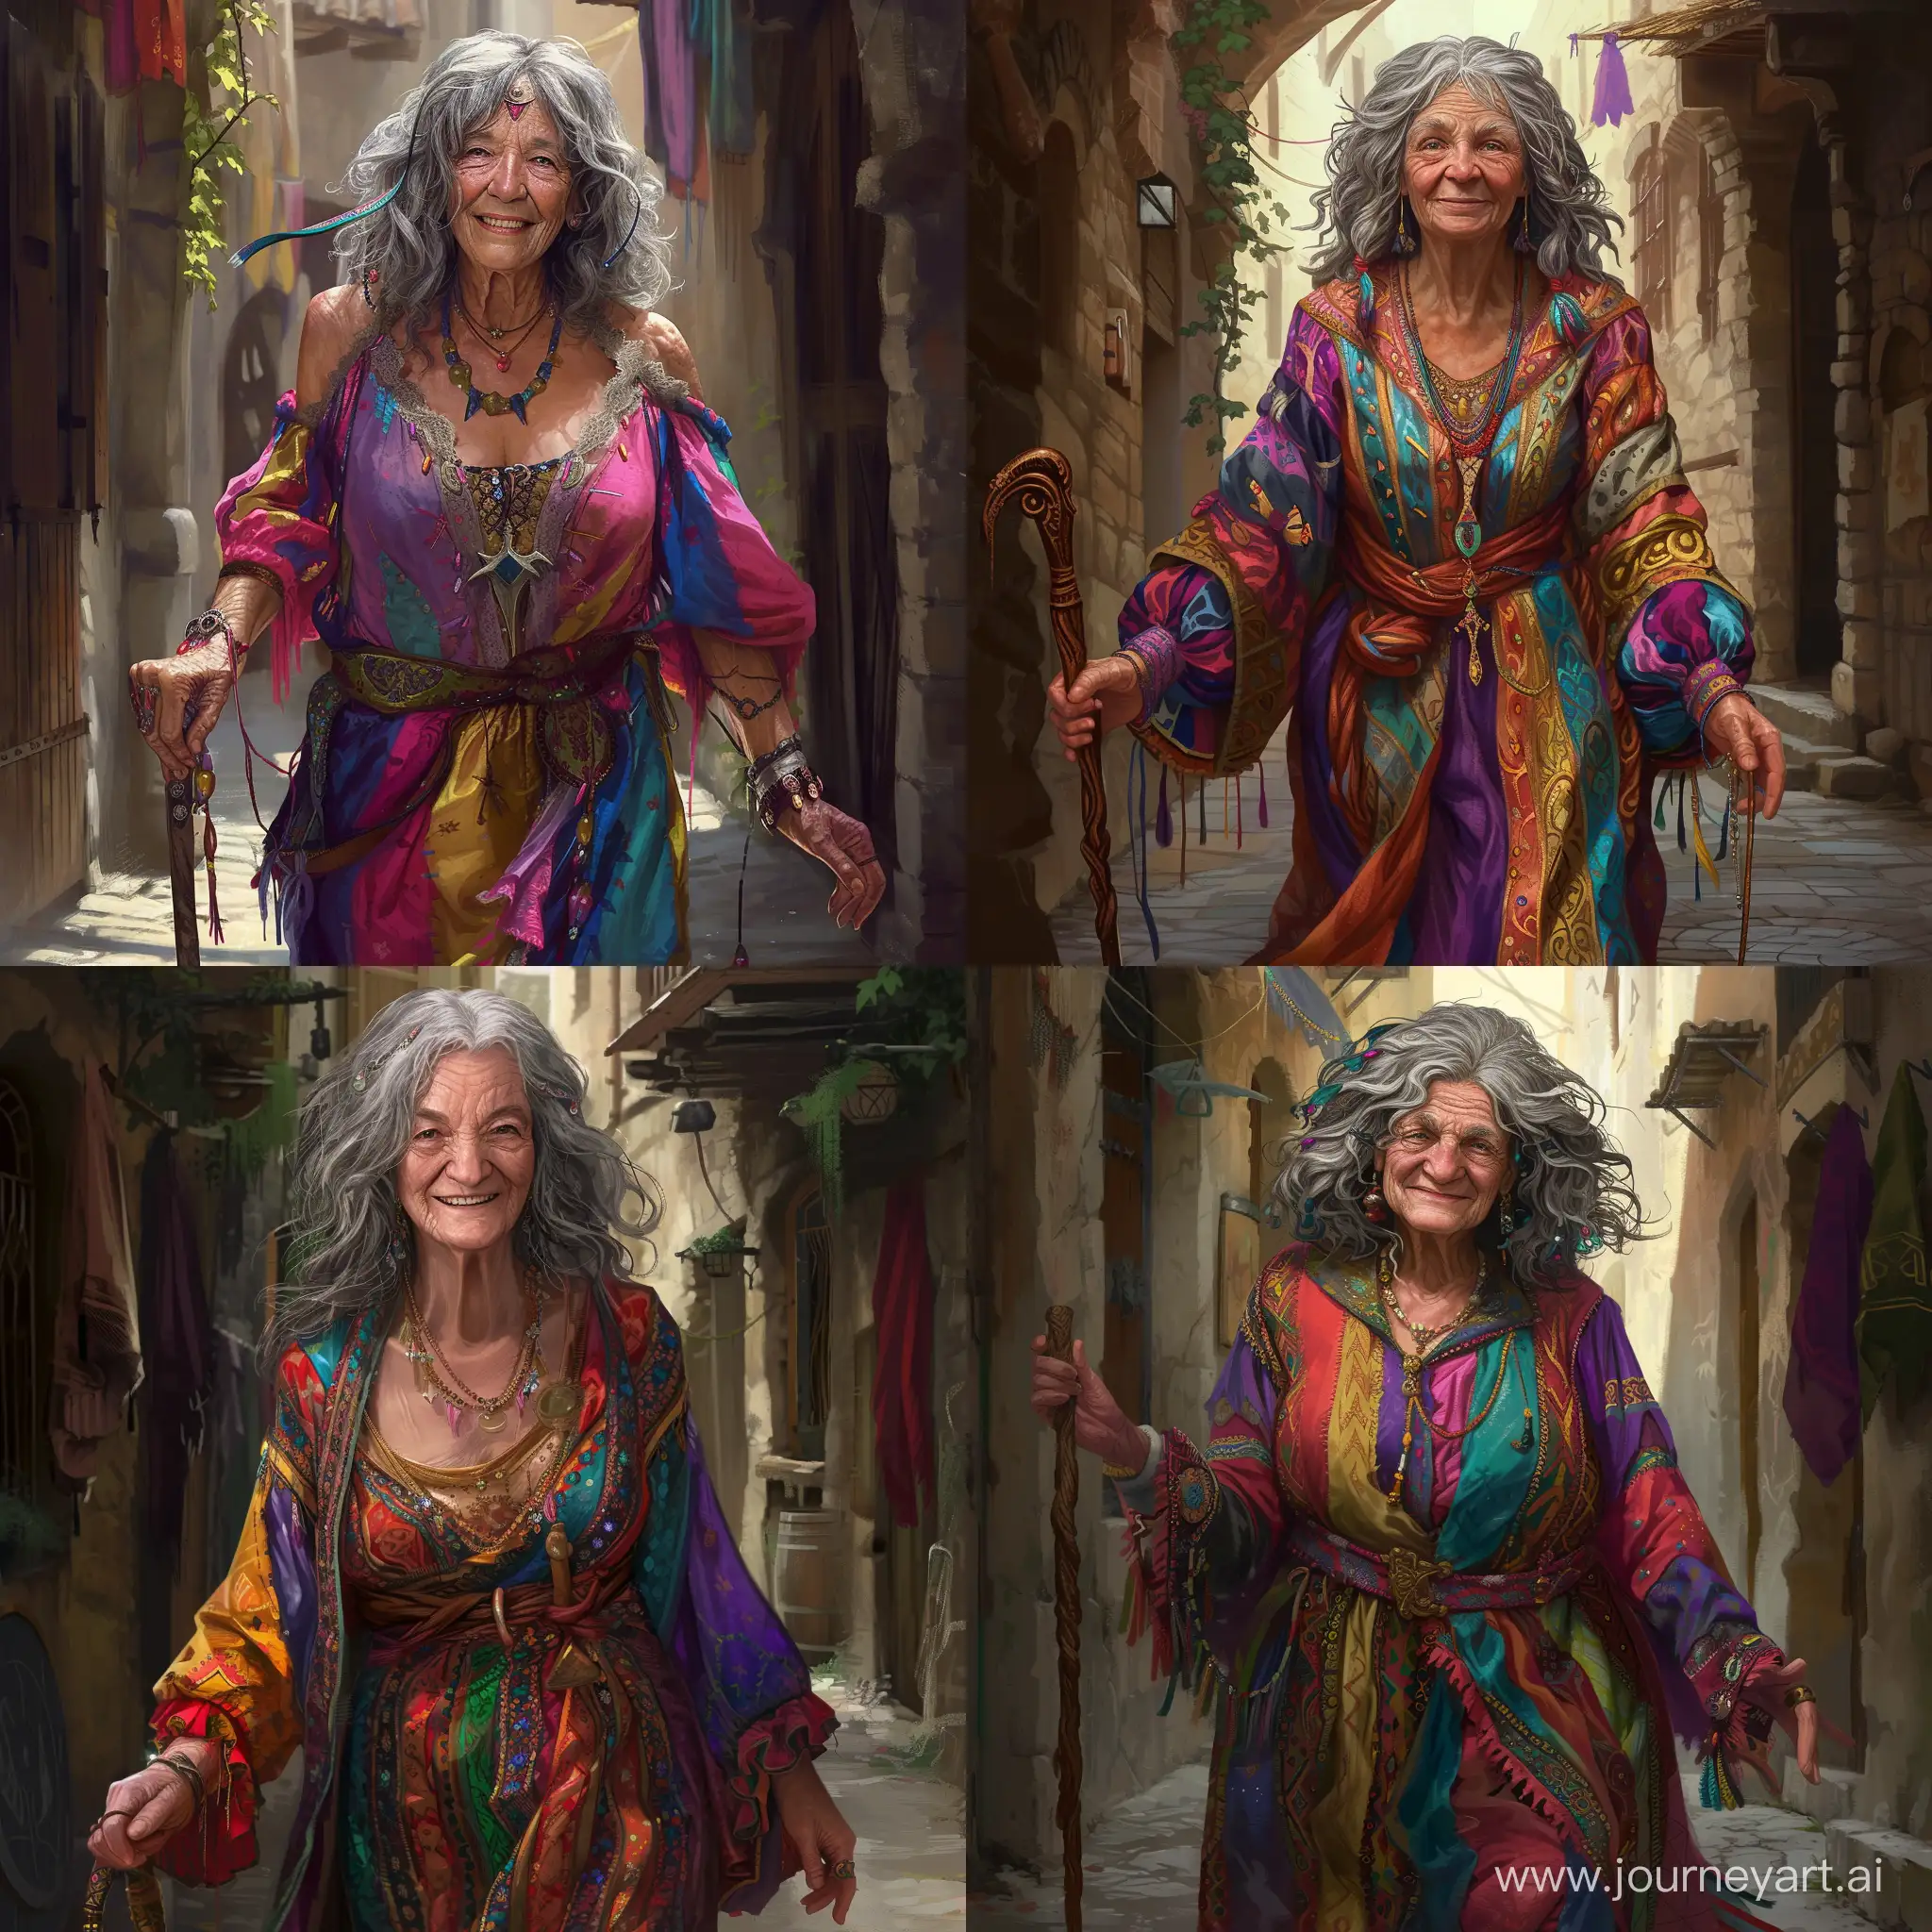 Draw a character from the Dungeons and Dragons universe according to the following description: She is an senior human woman 50 years old dressed in colorful gypsy clothes. She has wavy gray hair on her head and a soft joyful smile. Her face starts to wrinkle, but she isn't too old yet. Her face radiates wisdom and kindness.
She has a walking staff in her hand, as she makes way through an alleyway.